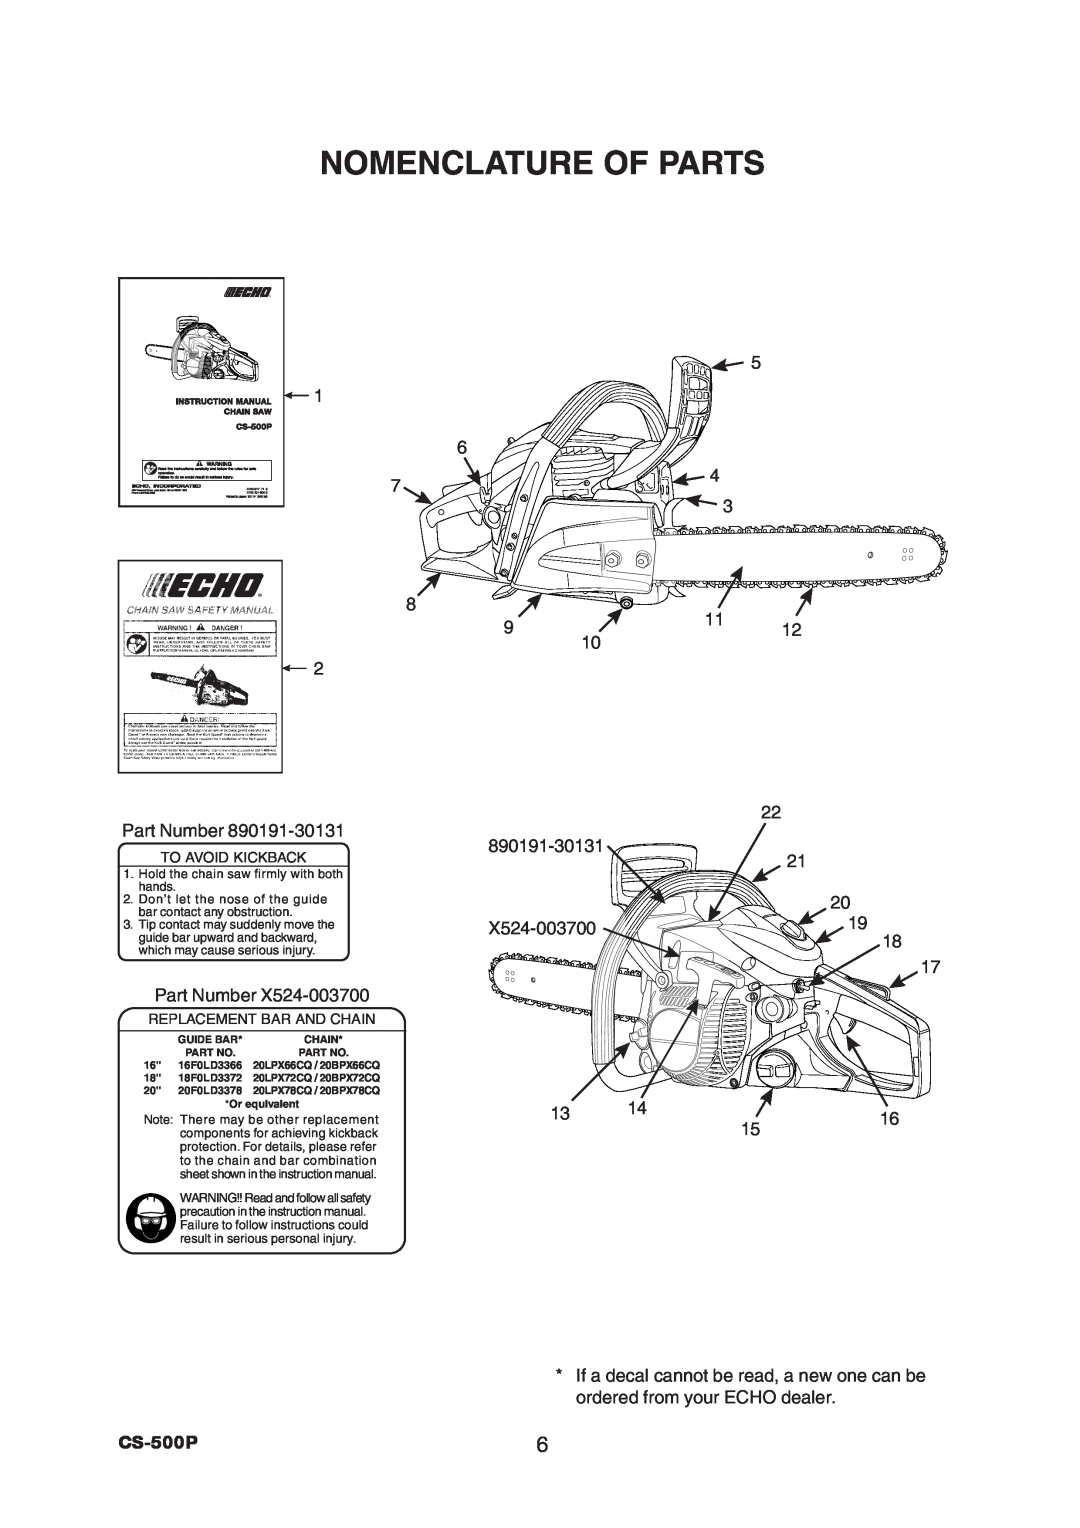 Echo CS-500P instruction manual Nomenclature Of Parts, Hold the chain saw firmly with both hands 